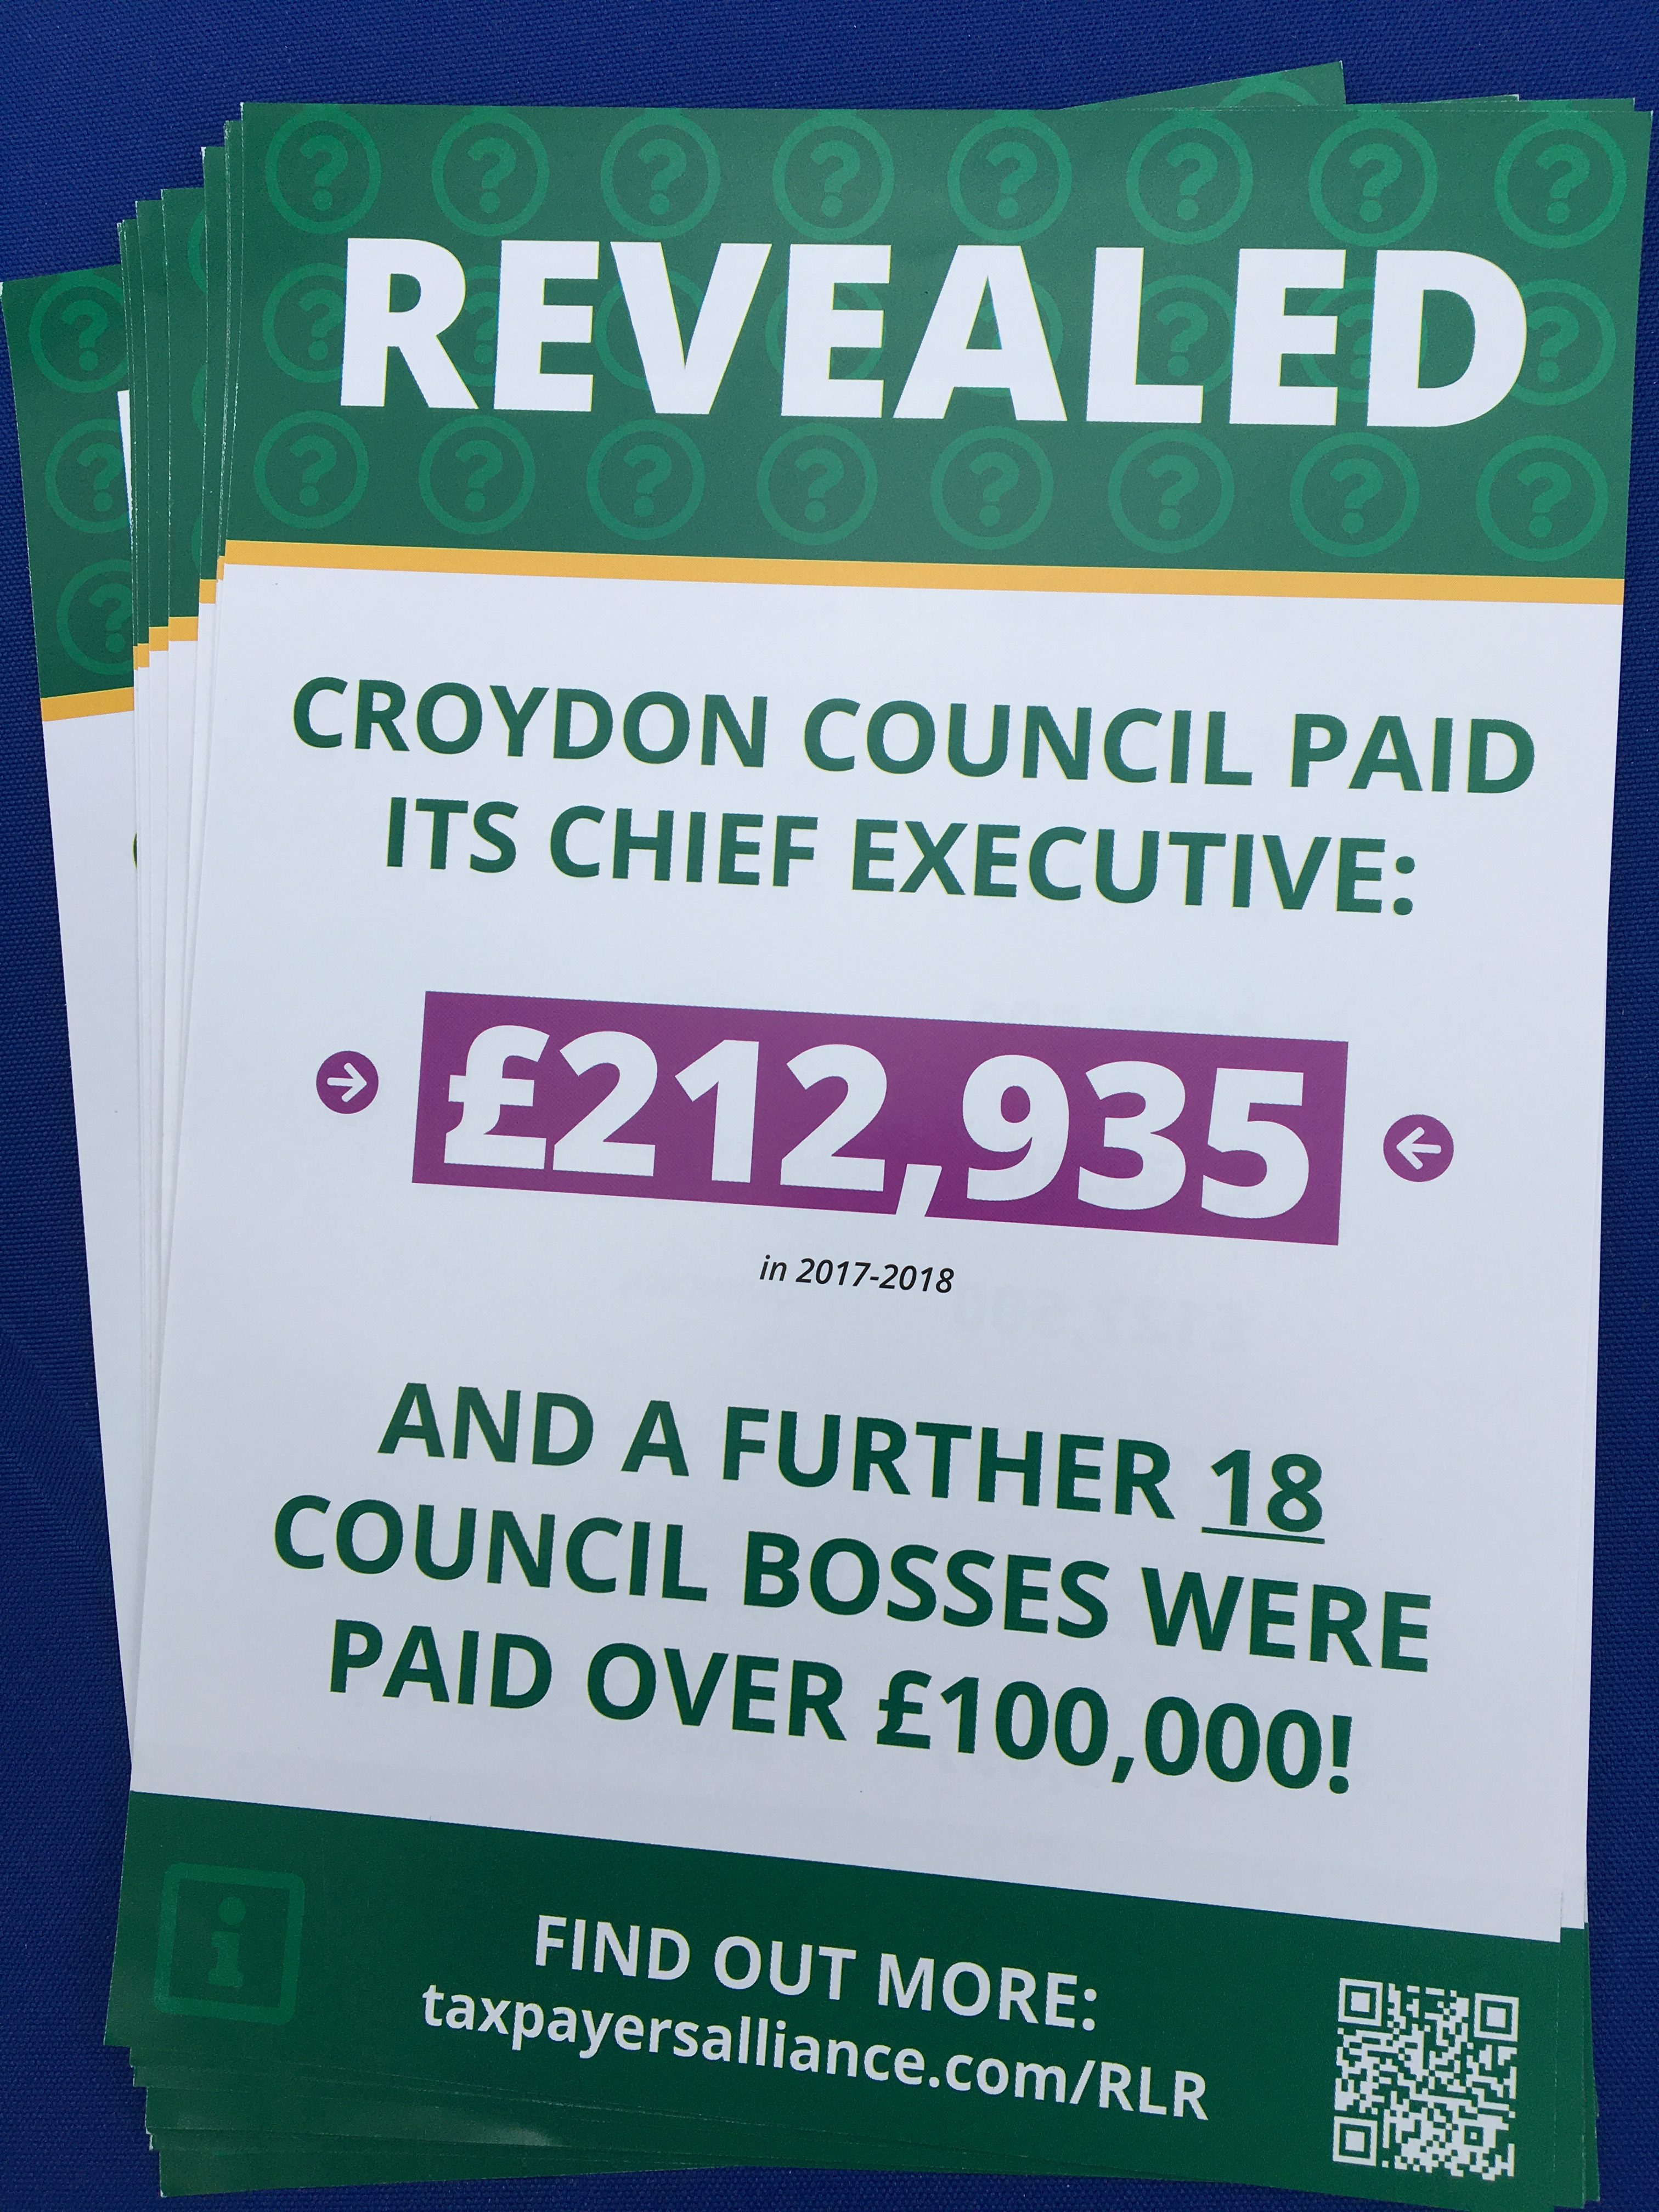 Press Release – CROYDON CONSTITUTIONALISTS TEAM UP WITH TAXPAYERS’ ALLIANCE TO SHINE A LIGHT ON WASTEFUL COUNCIL SPENDING